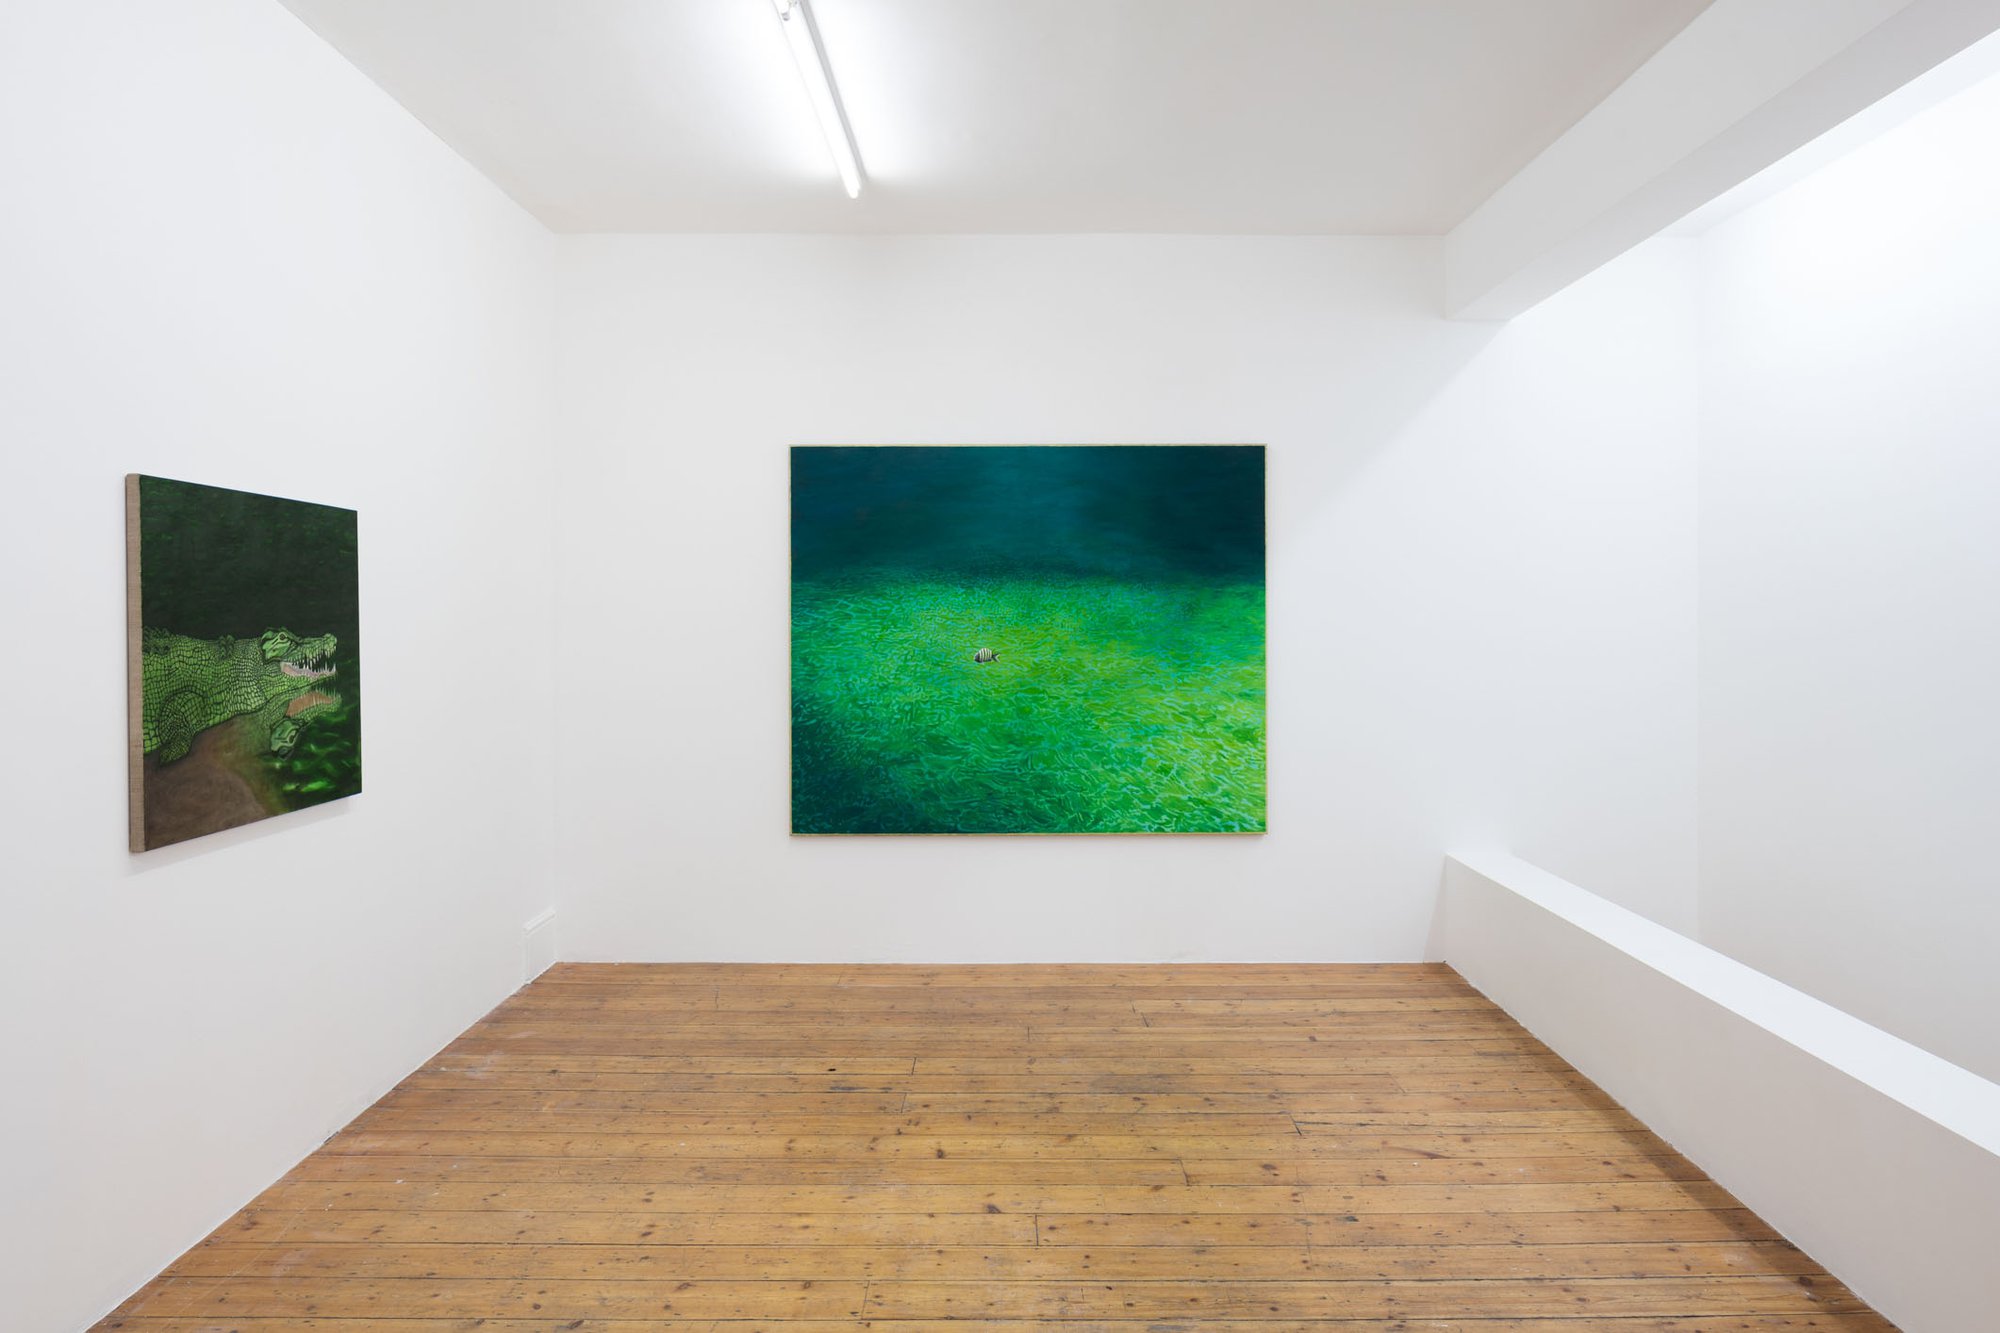 Leidy Churchman, Installation view, Lost Horizons, Rodeo, London, 2016